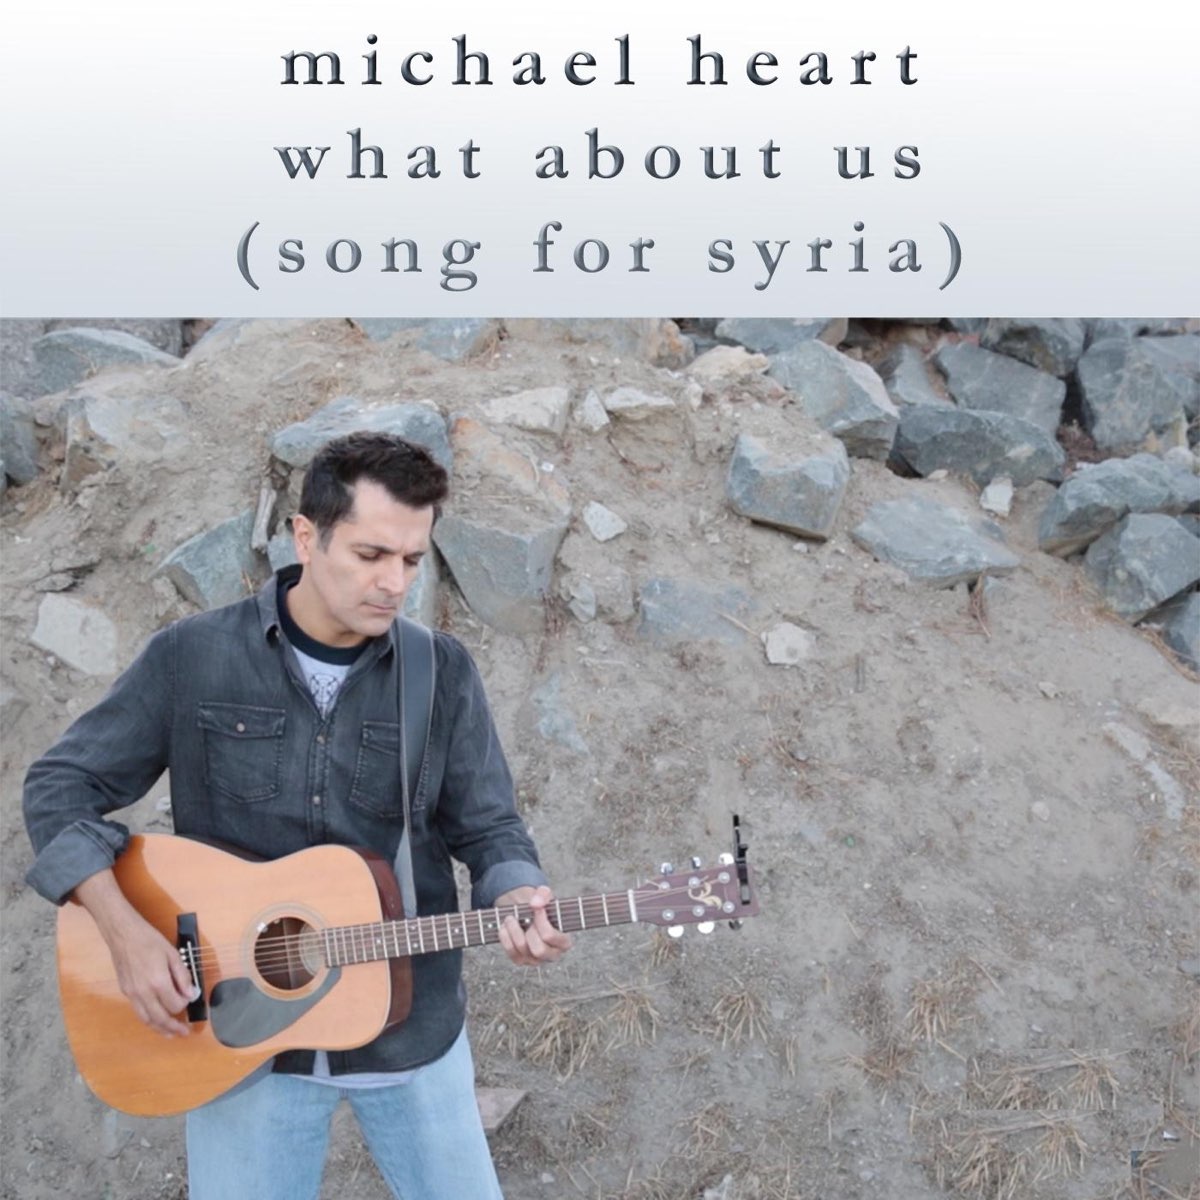 About us песня майкла. Mike Heart. Songs for 2 years.